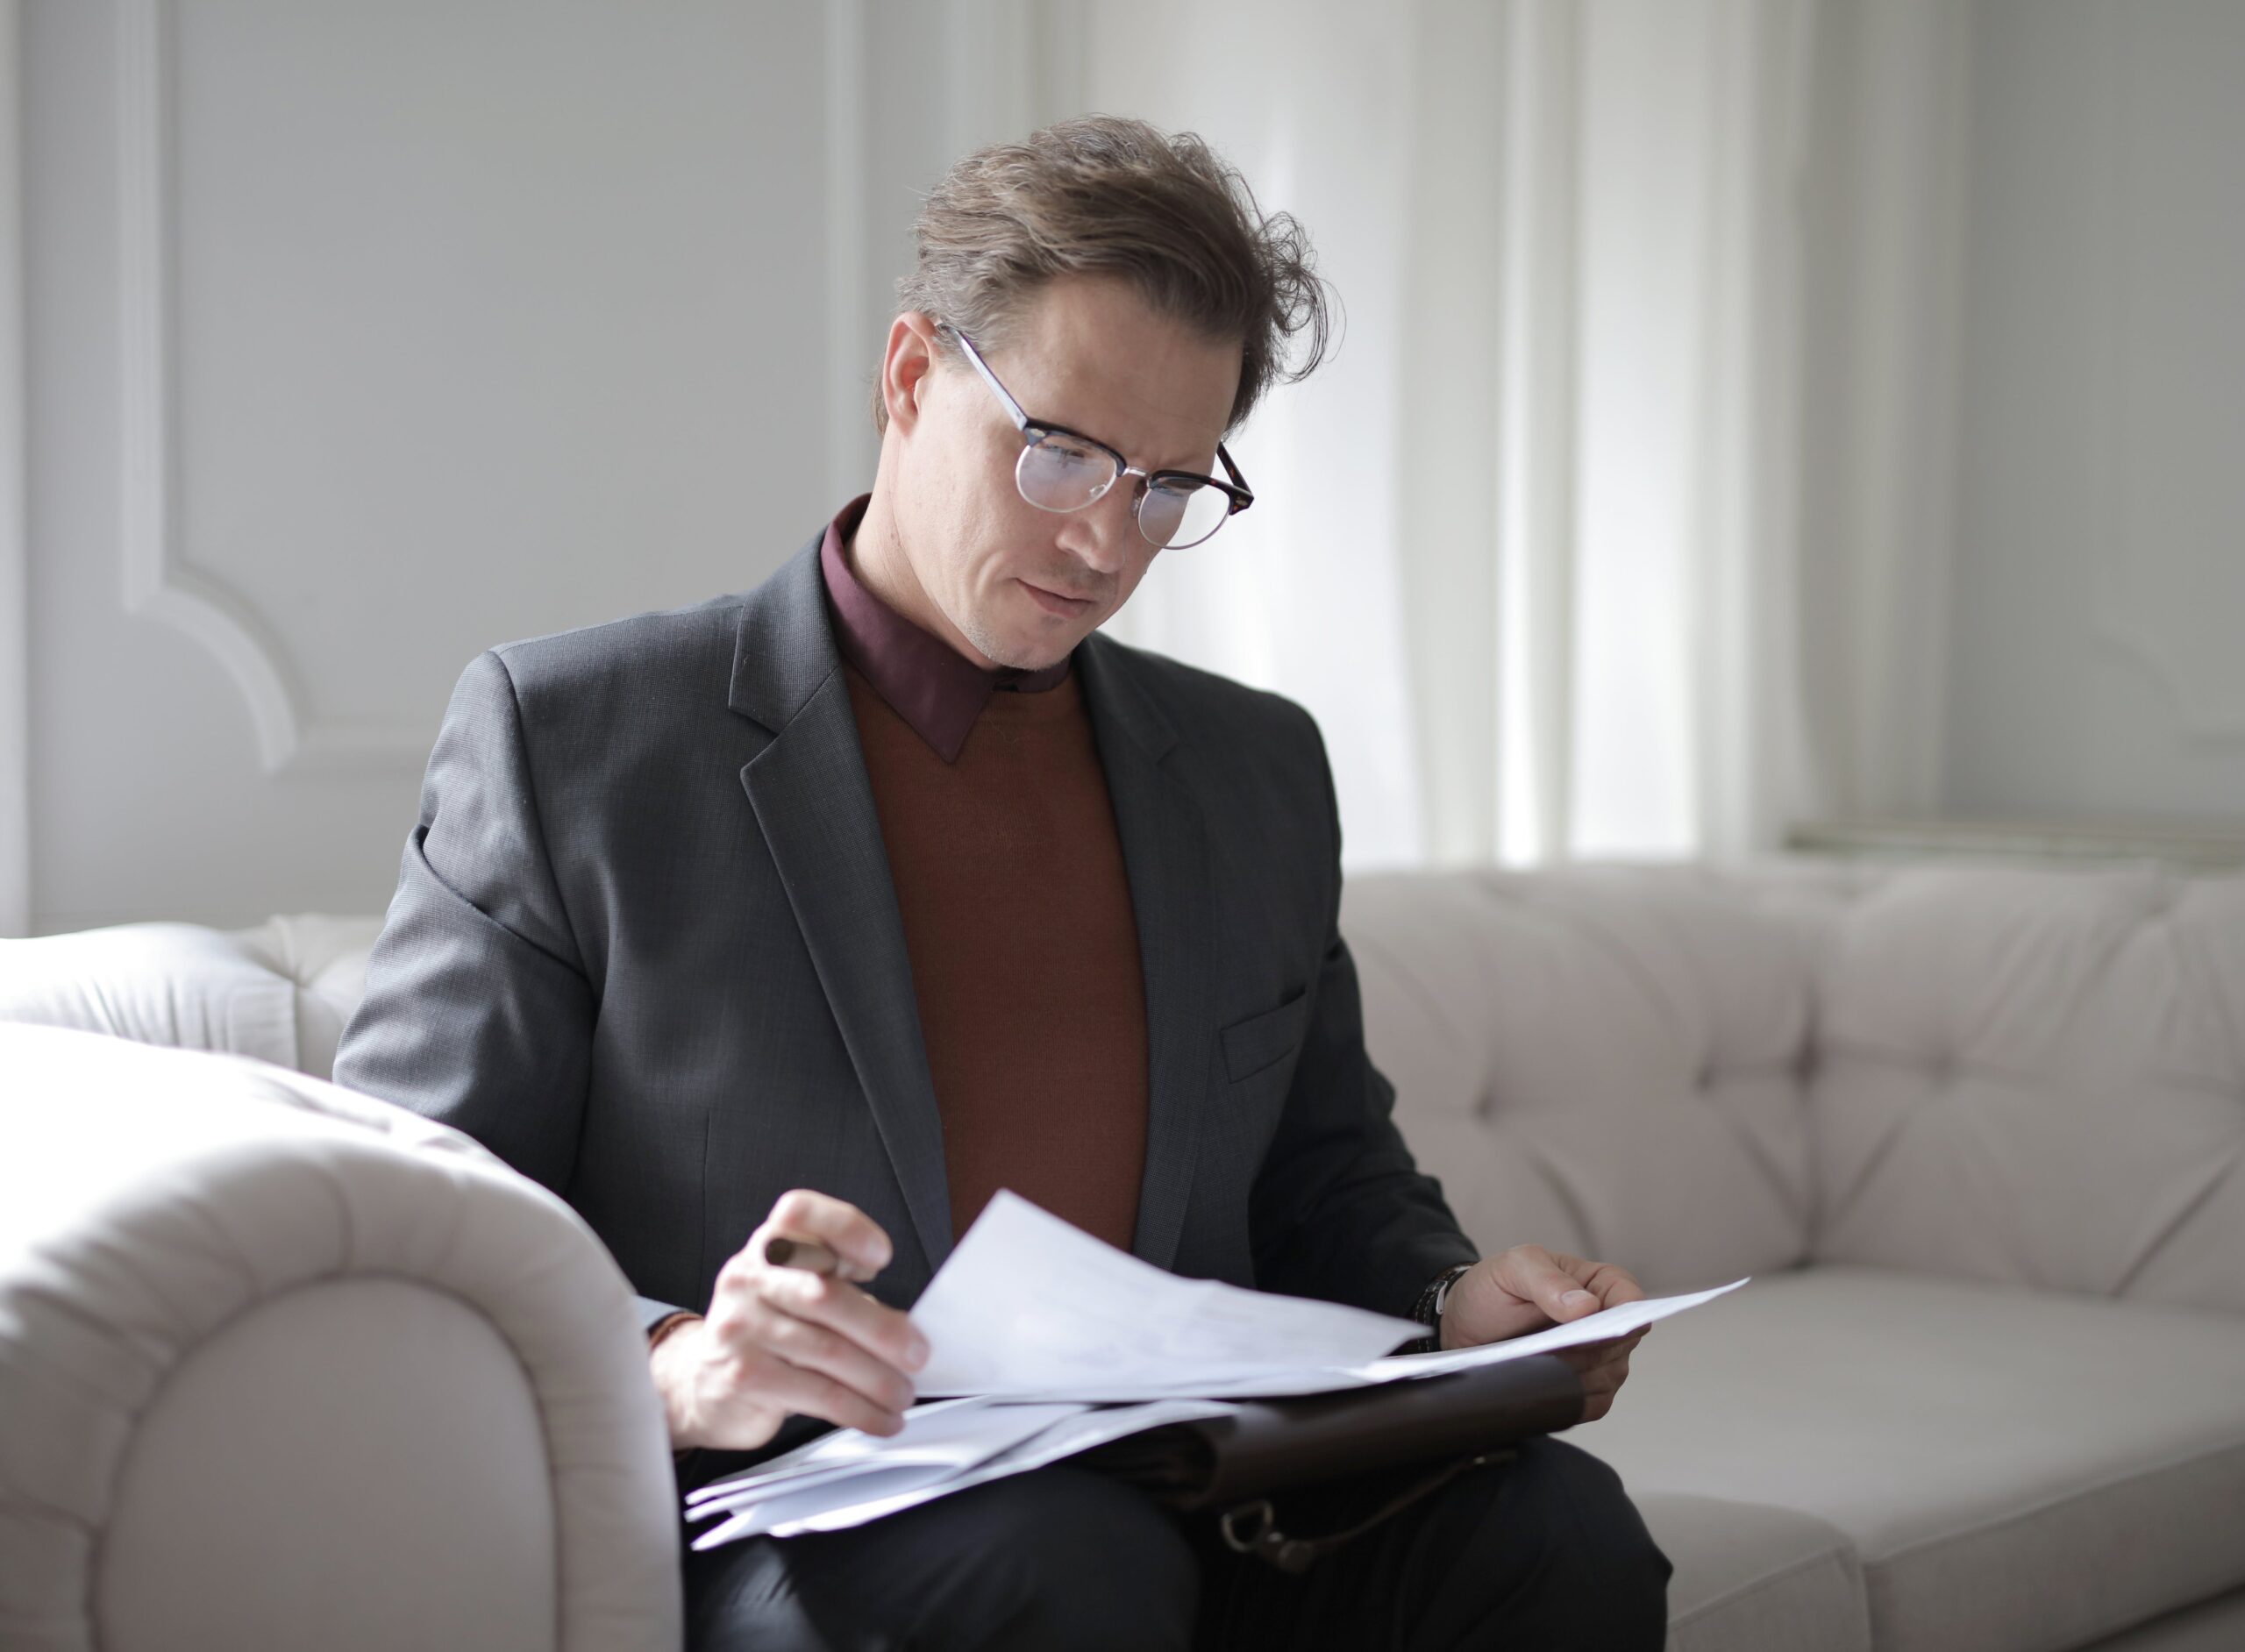 A person reviewing legal documents